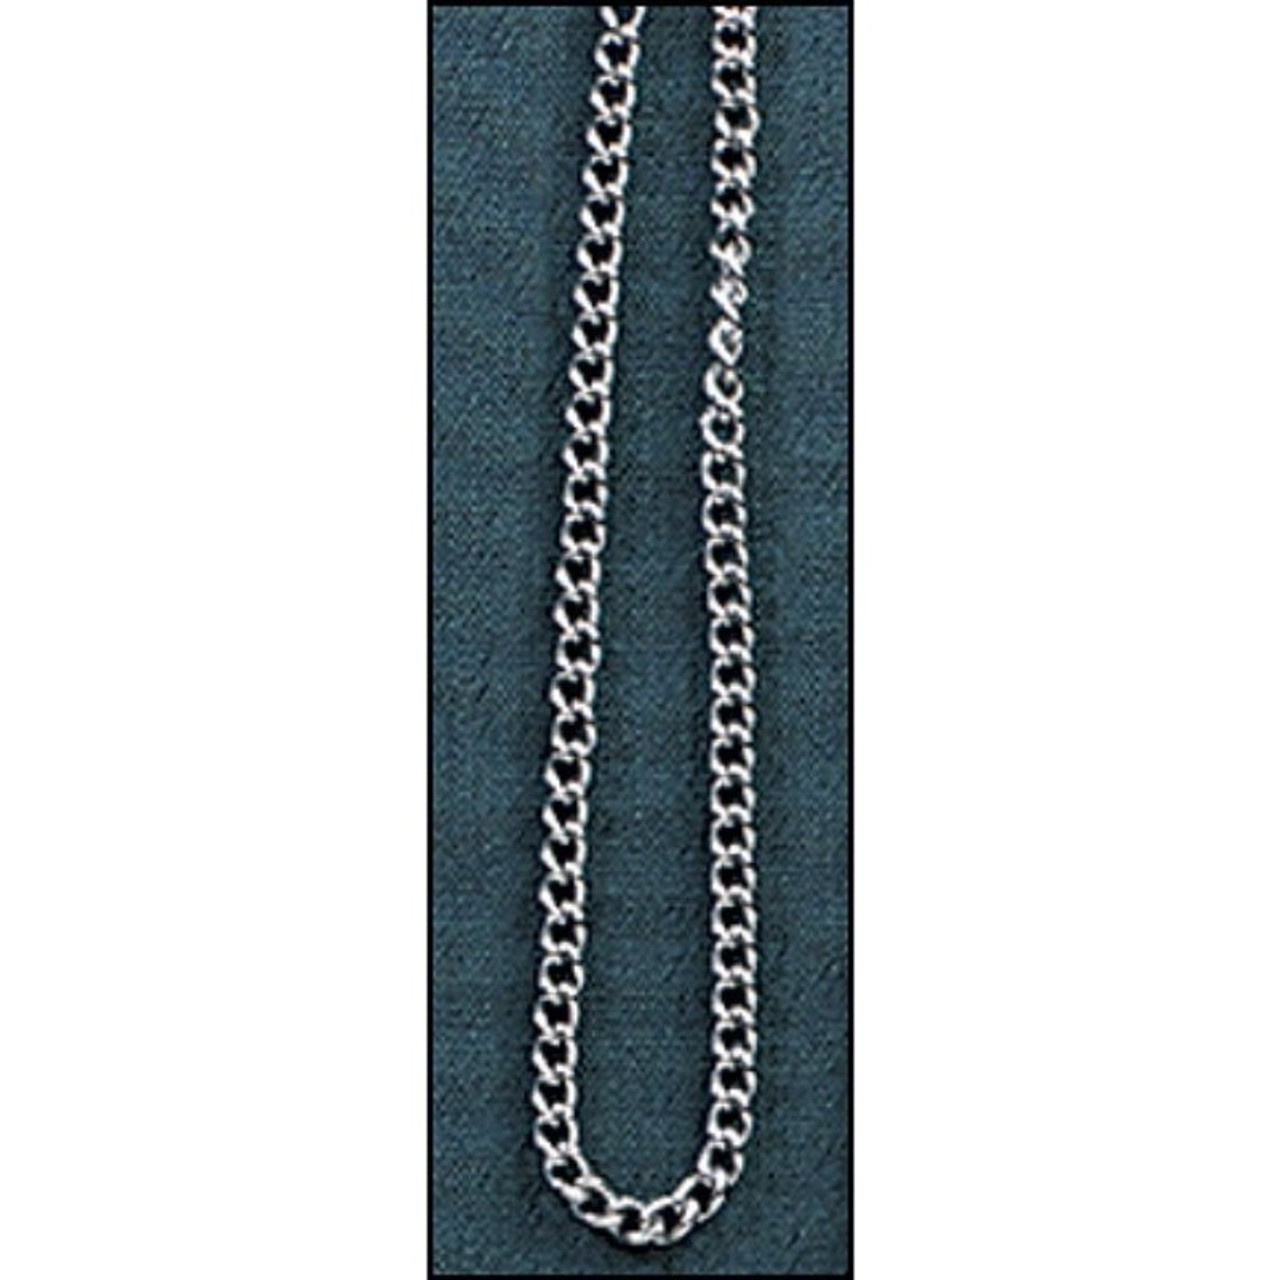 30 Stainless Steel Chains - 25/pk - Catholic Gifts and More